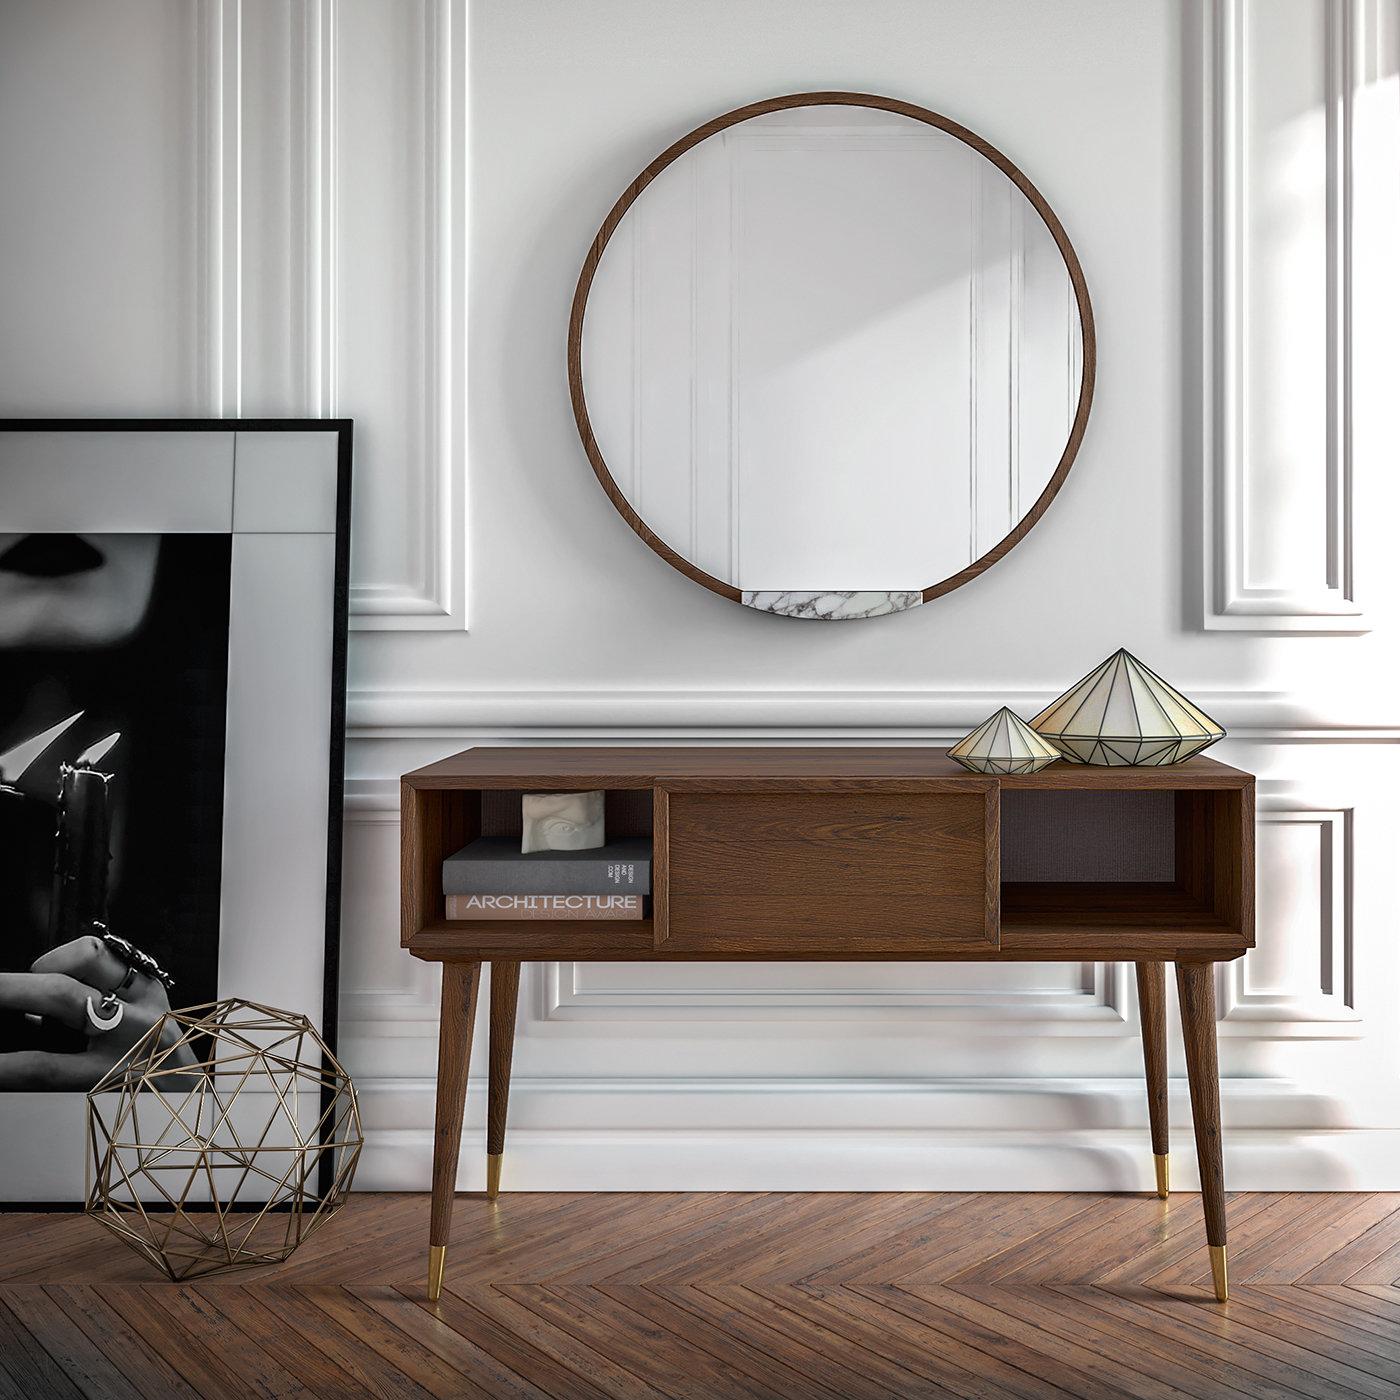 This superb retro-chic console strikes a perfect balance between functionality and elegance. The wooden structure has an antique durmast veneer while the solid durmast legs are tapered and marked with gold-finished brass tips (also available in a